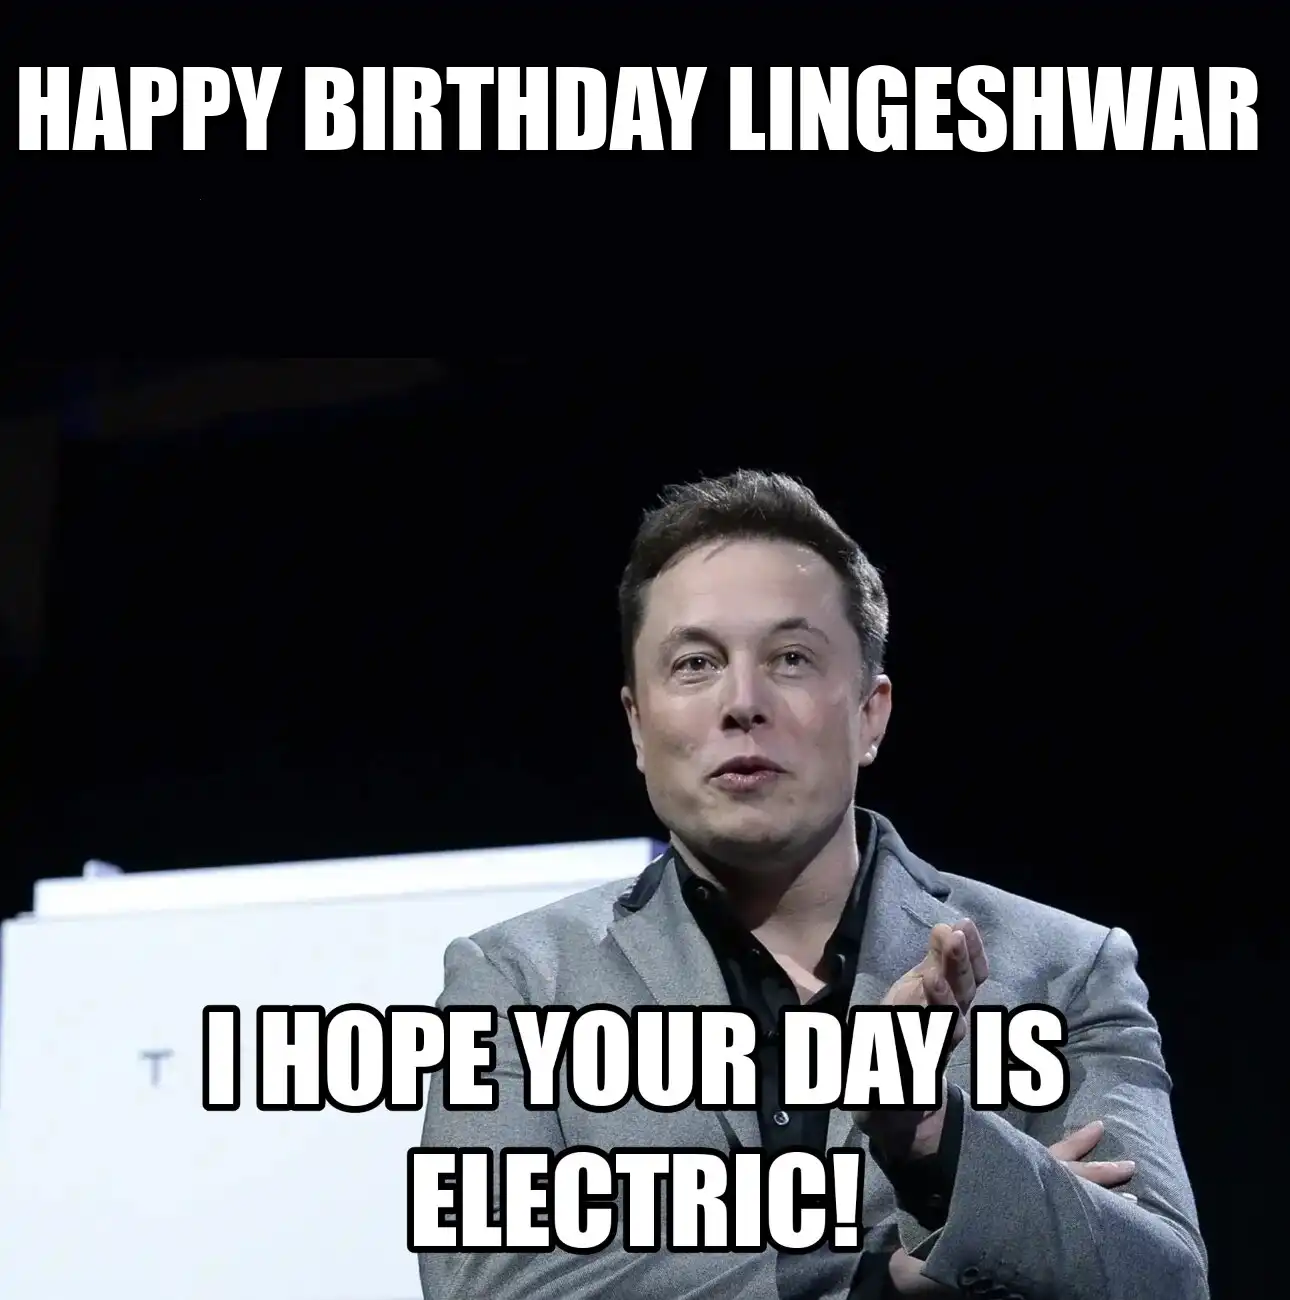 Happy Birthday Lingeshwar I Hope Your Day Is Electric Meme